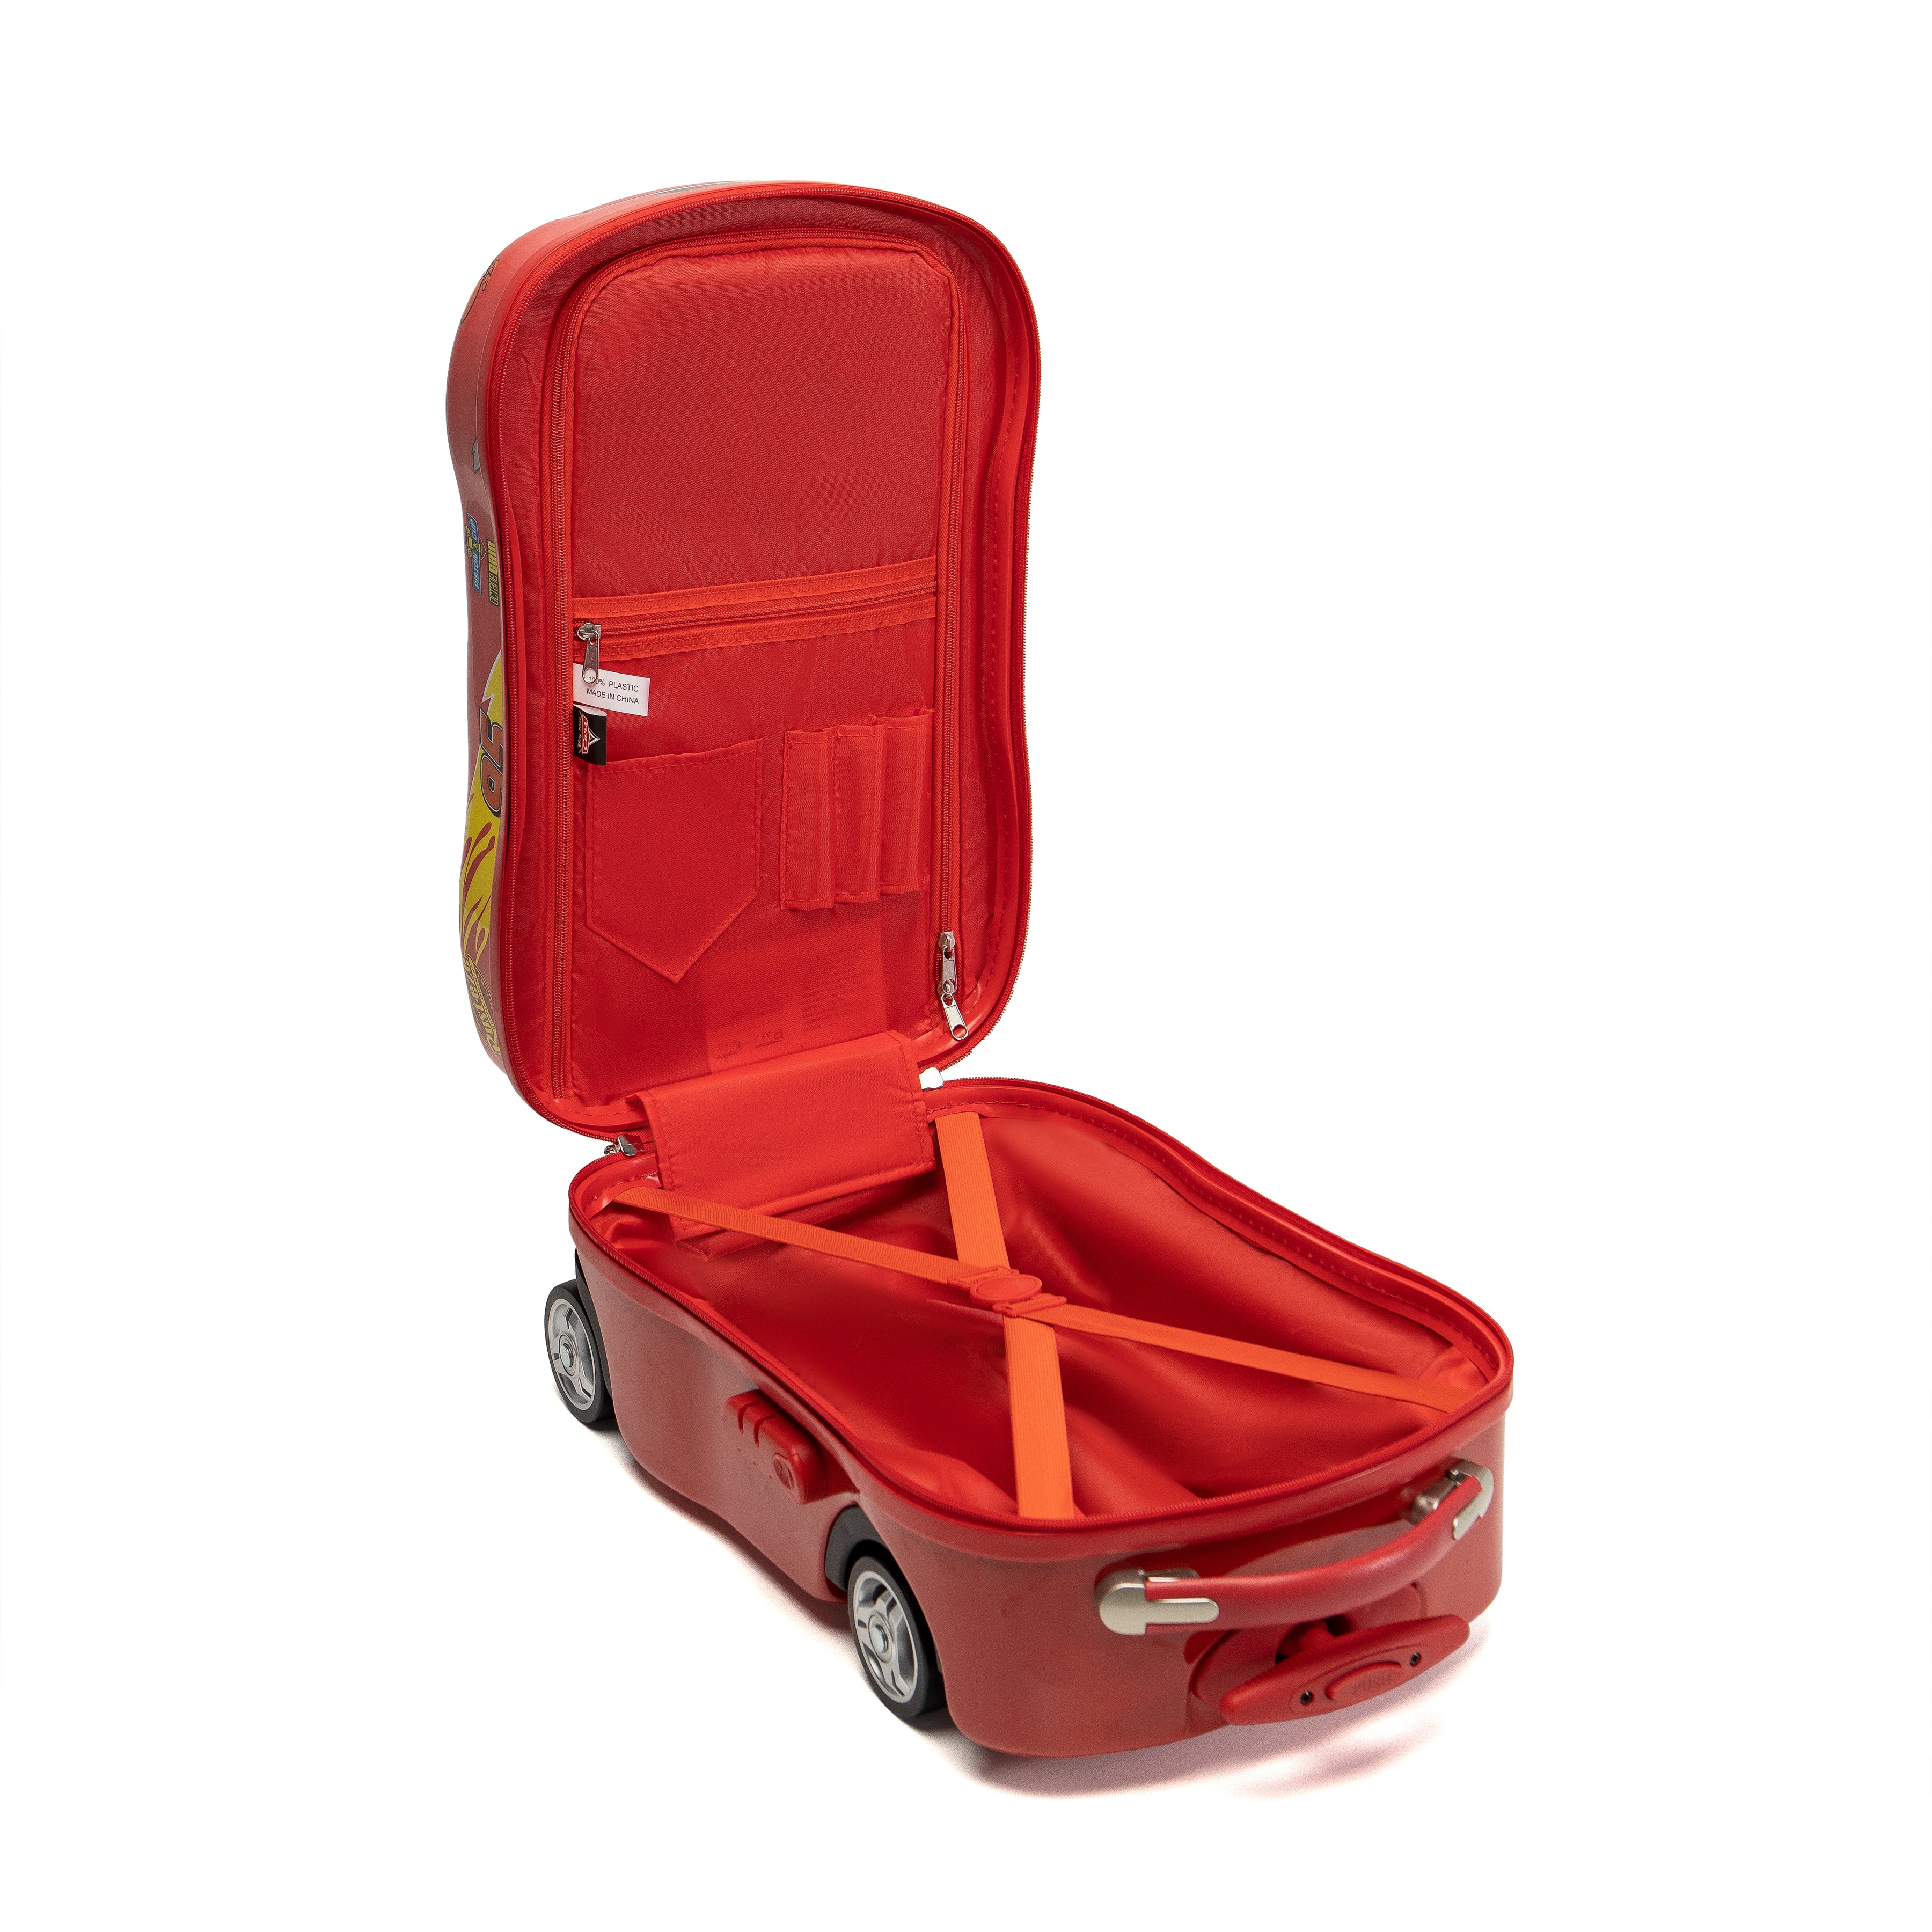 Two smooth rolling wheels for transporting - two extras for novelty look Telescopic retractable handle